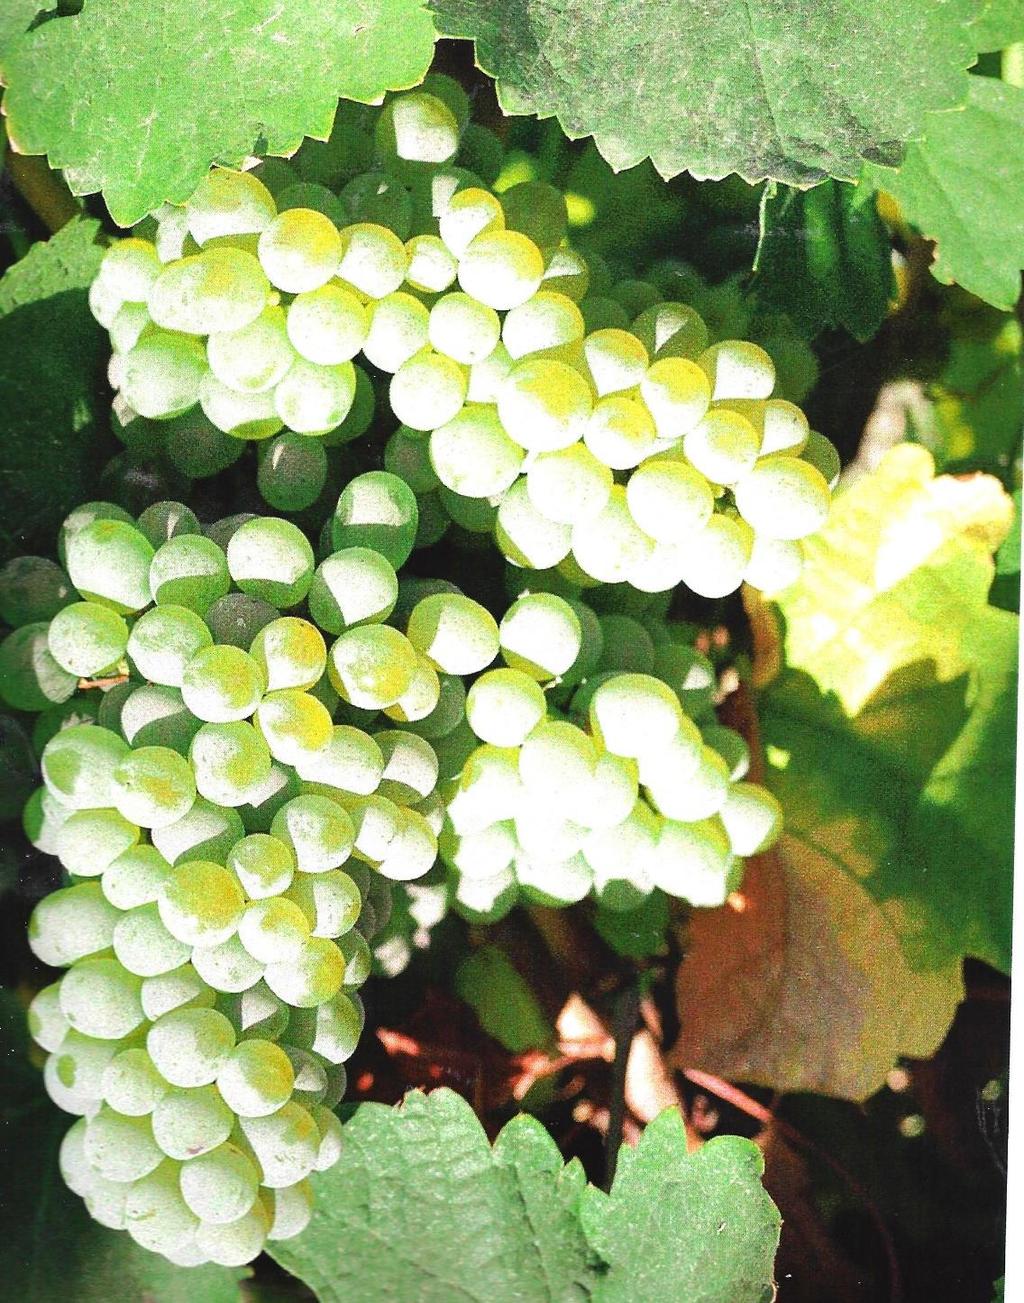 Gouveio/Godello Origin: Mentioned in Ancient Roman documents from Bierzo (north-west of Spain) Synonyms: Godelho (formerly Verdelho) Area cultivated: 3.000 ha (increasing) Pruning weight: 2.4-3.